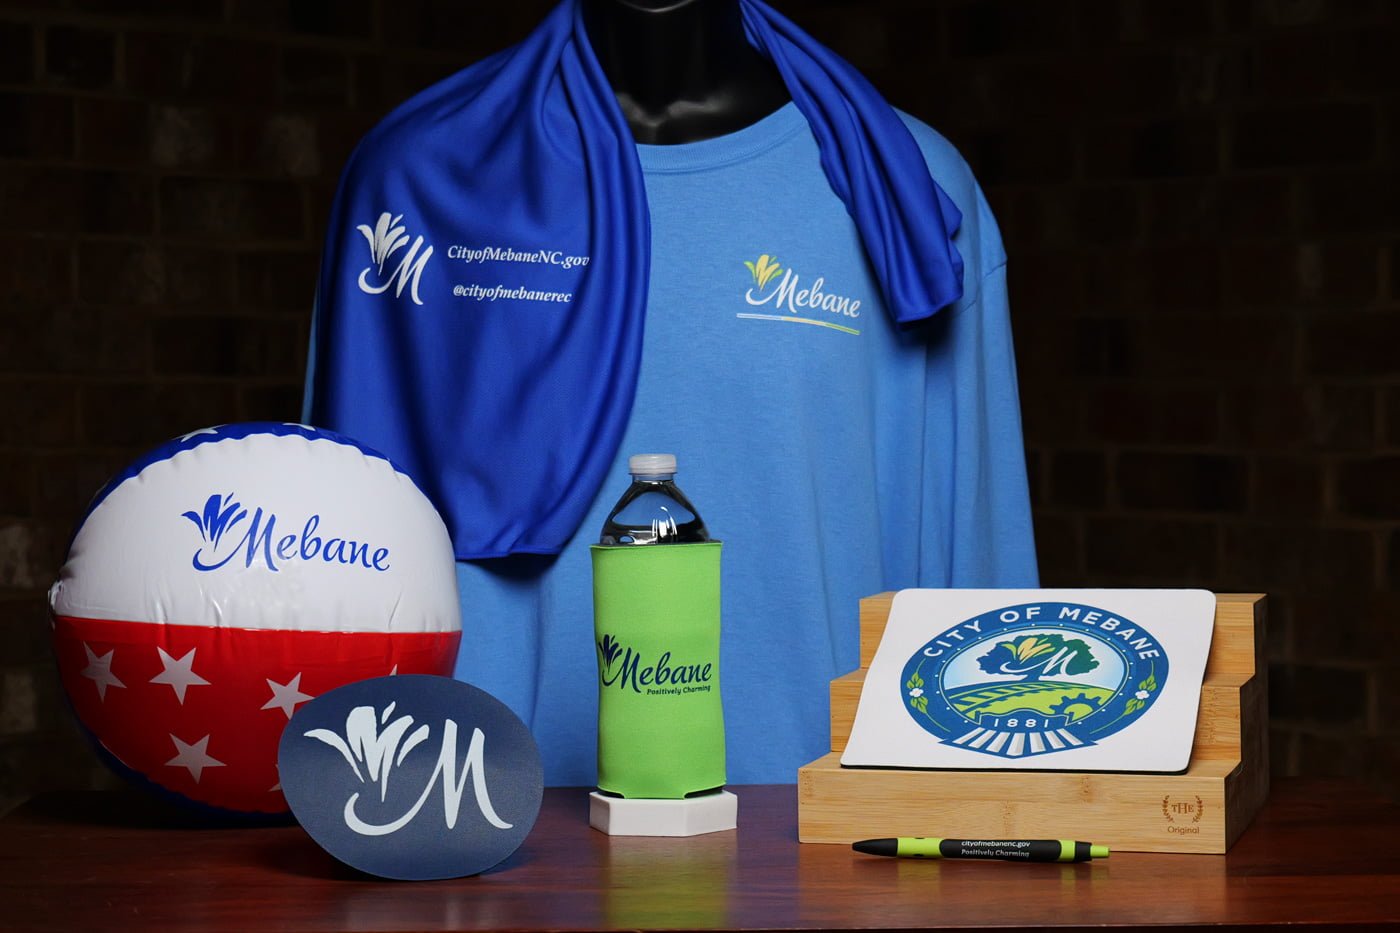 Promotional products ordered by the City of Mebane